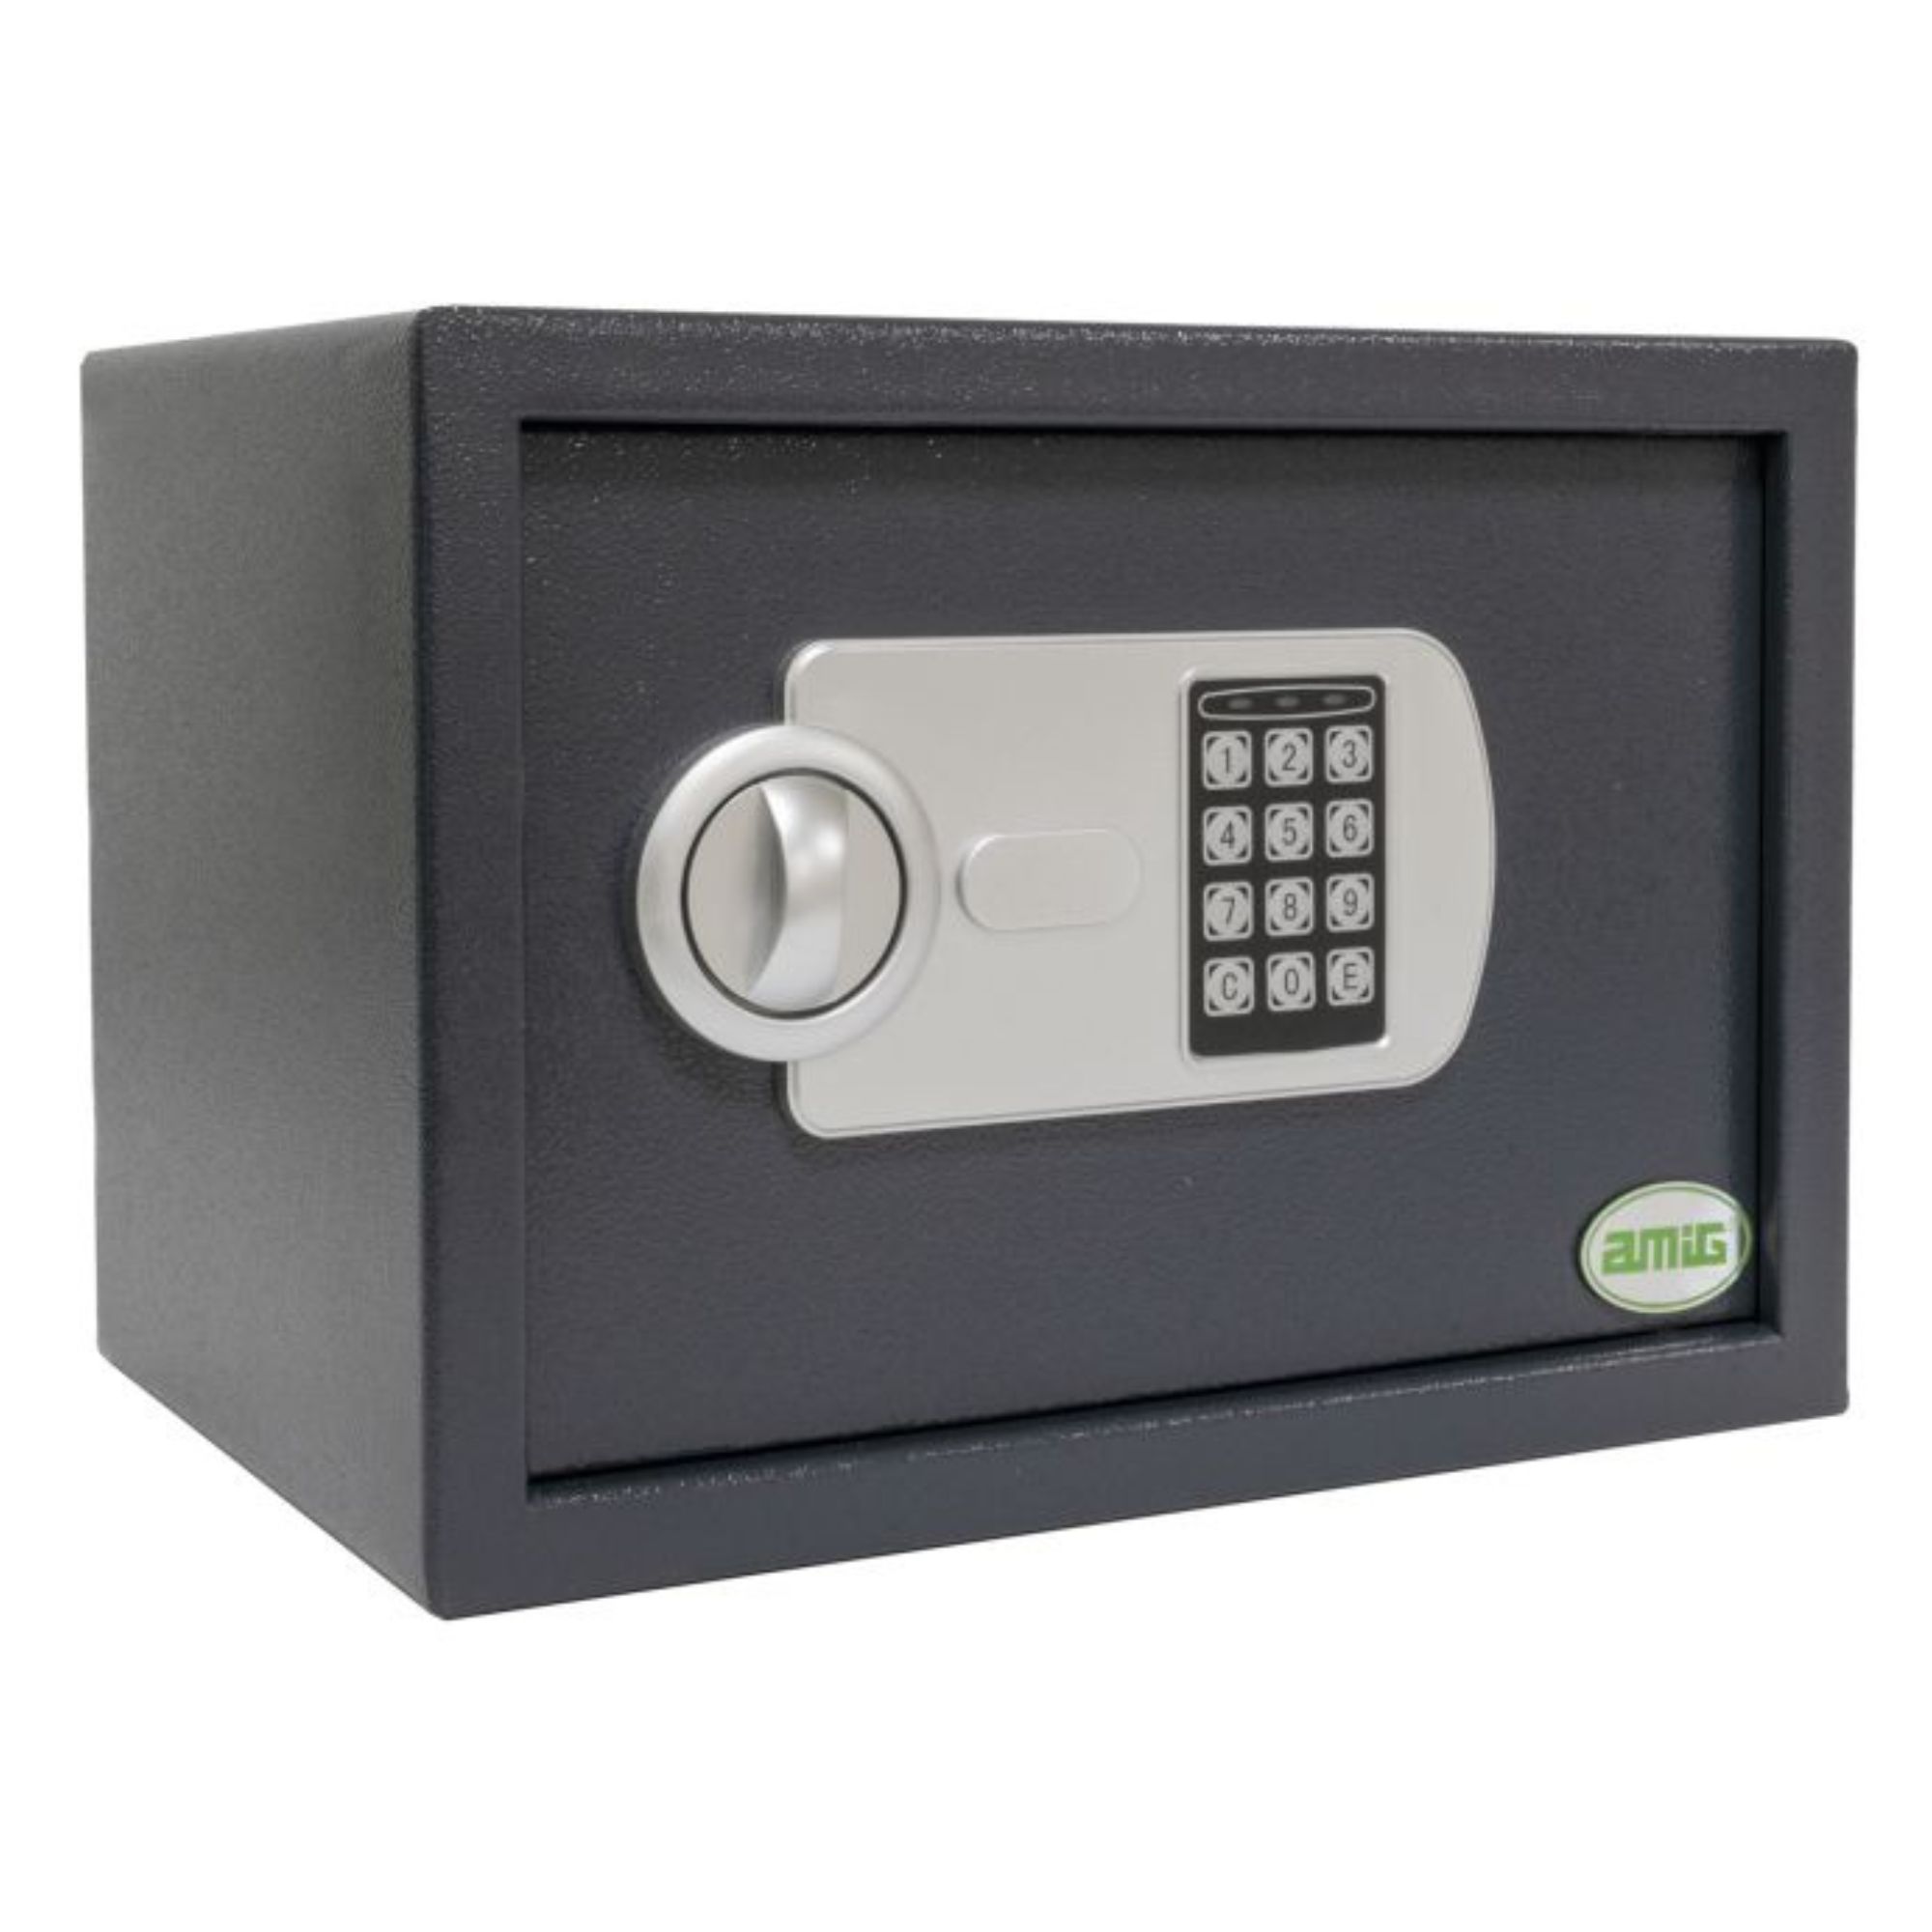 Cofre forte topsecure - M 31x20x20 cinza Amig